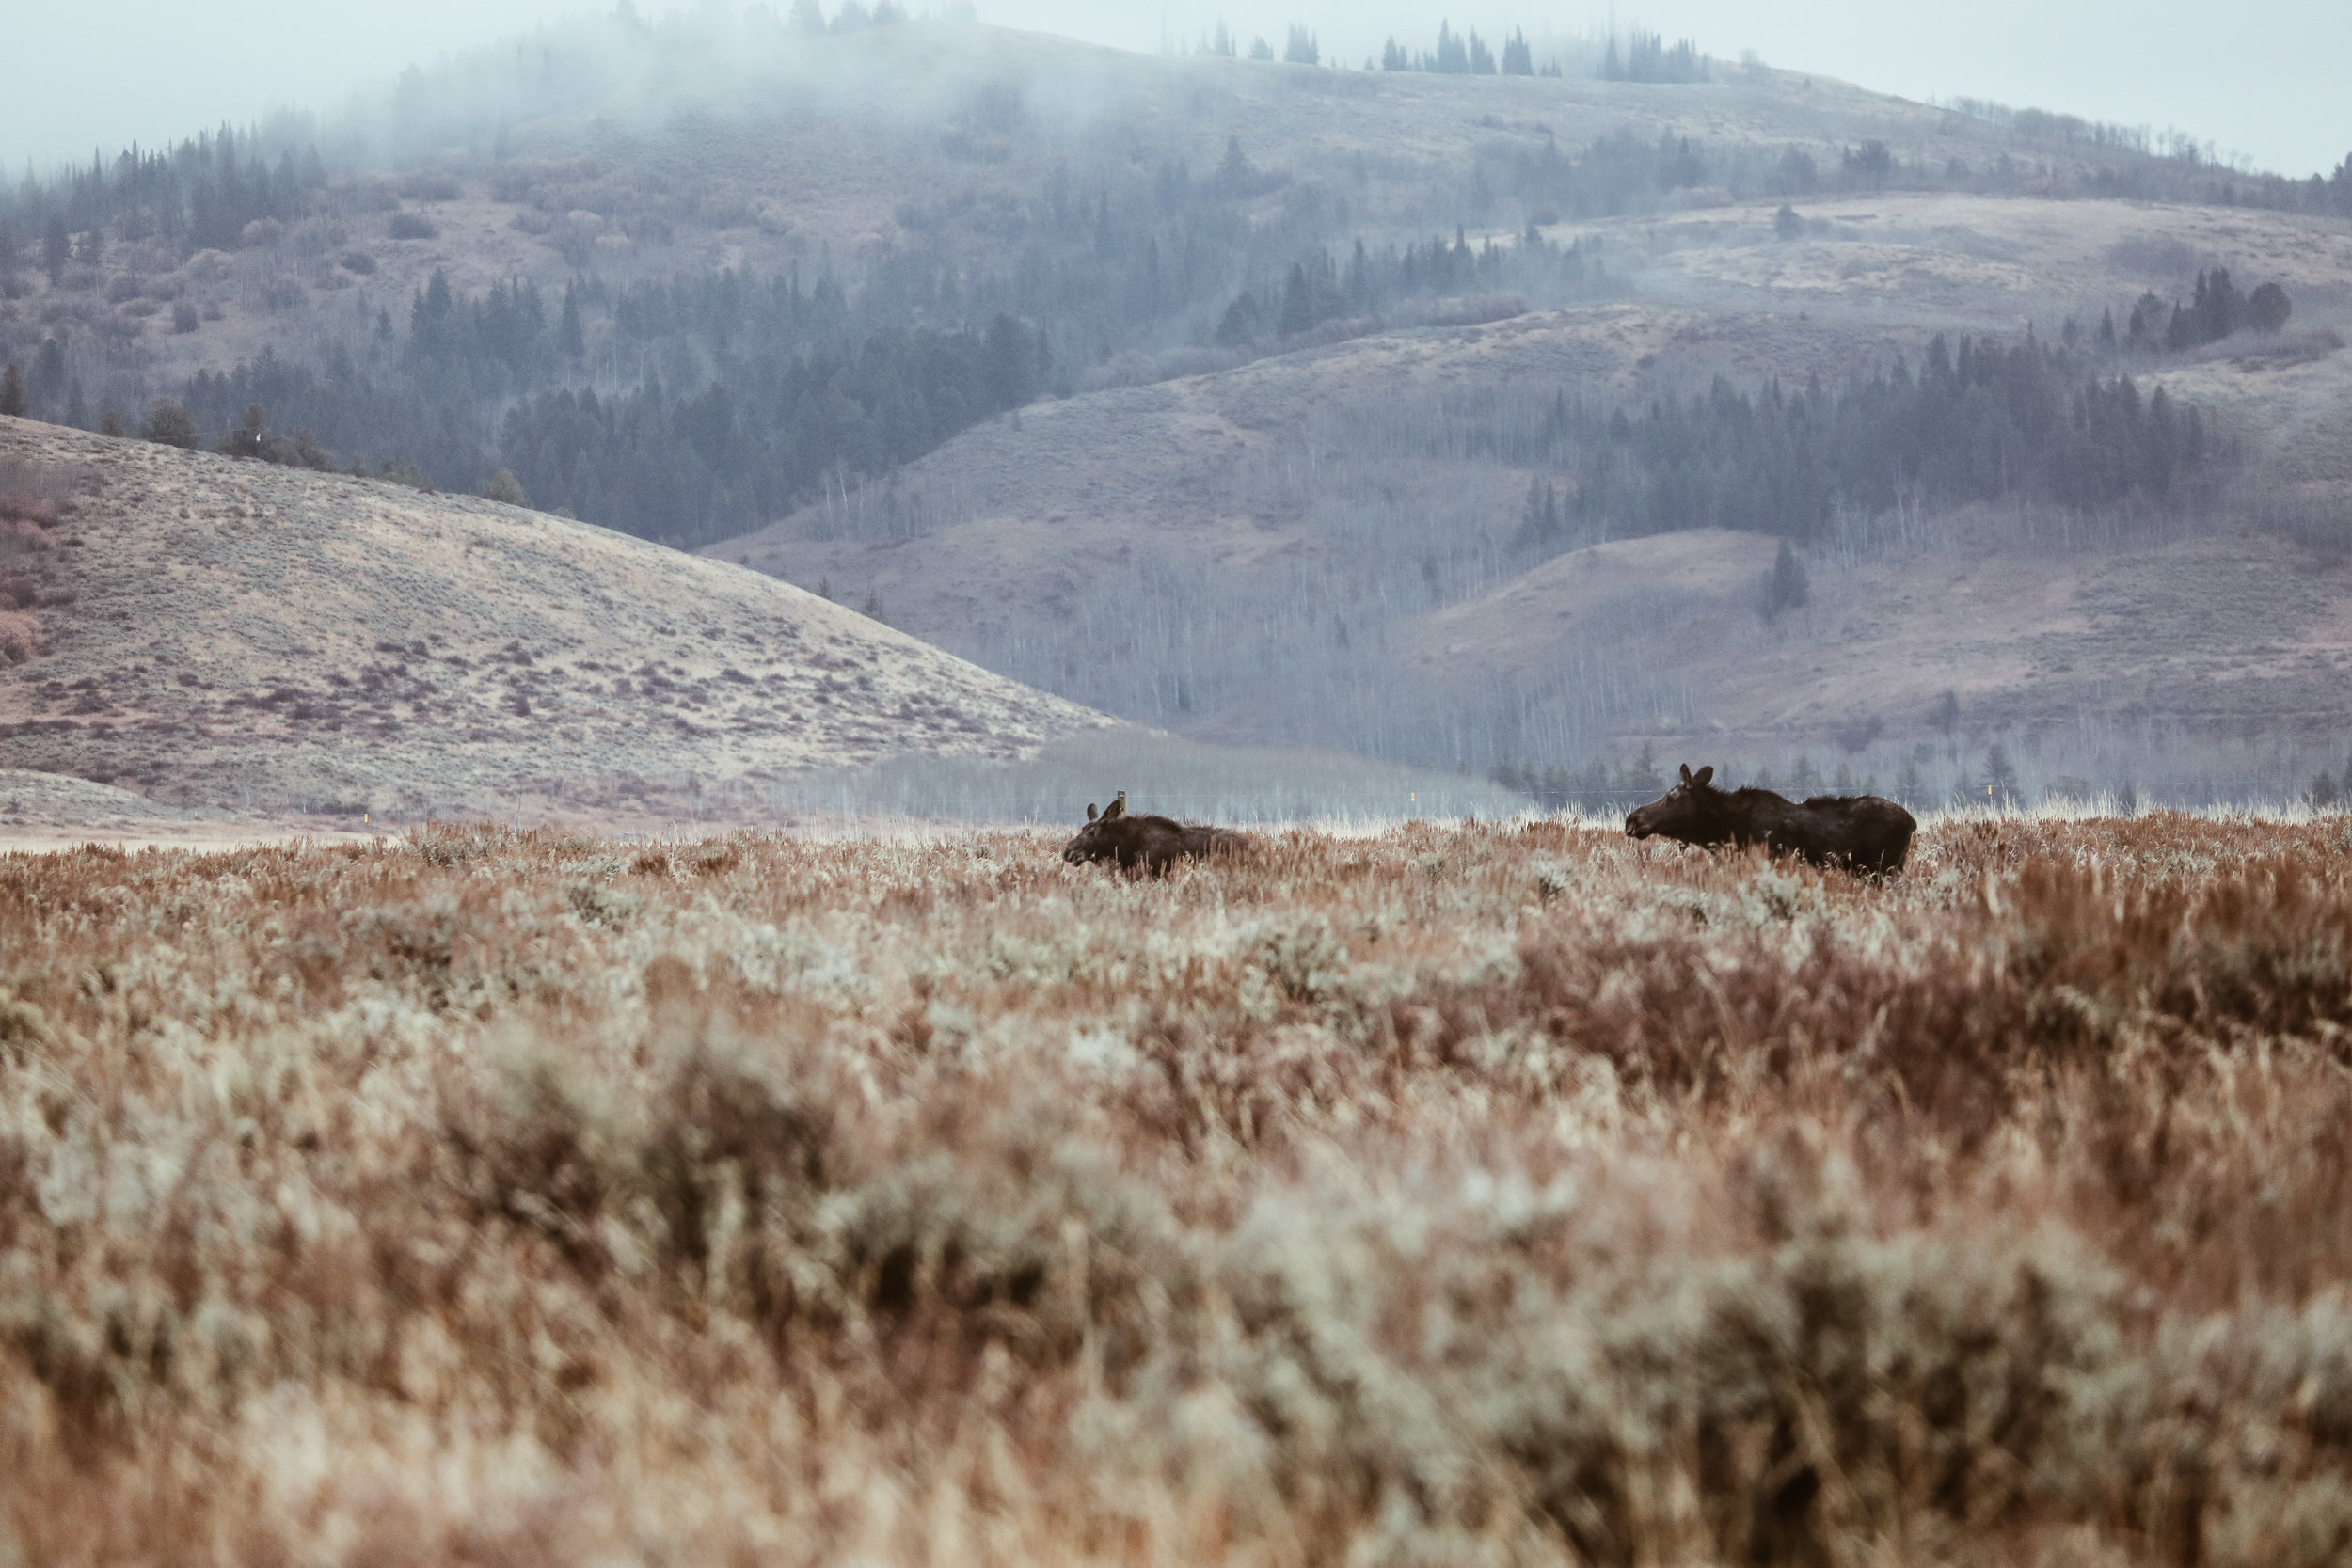 A baby moose + mama moose spotted in the field while on our Jackson Hole Wildlife Safari